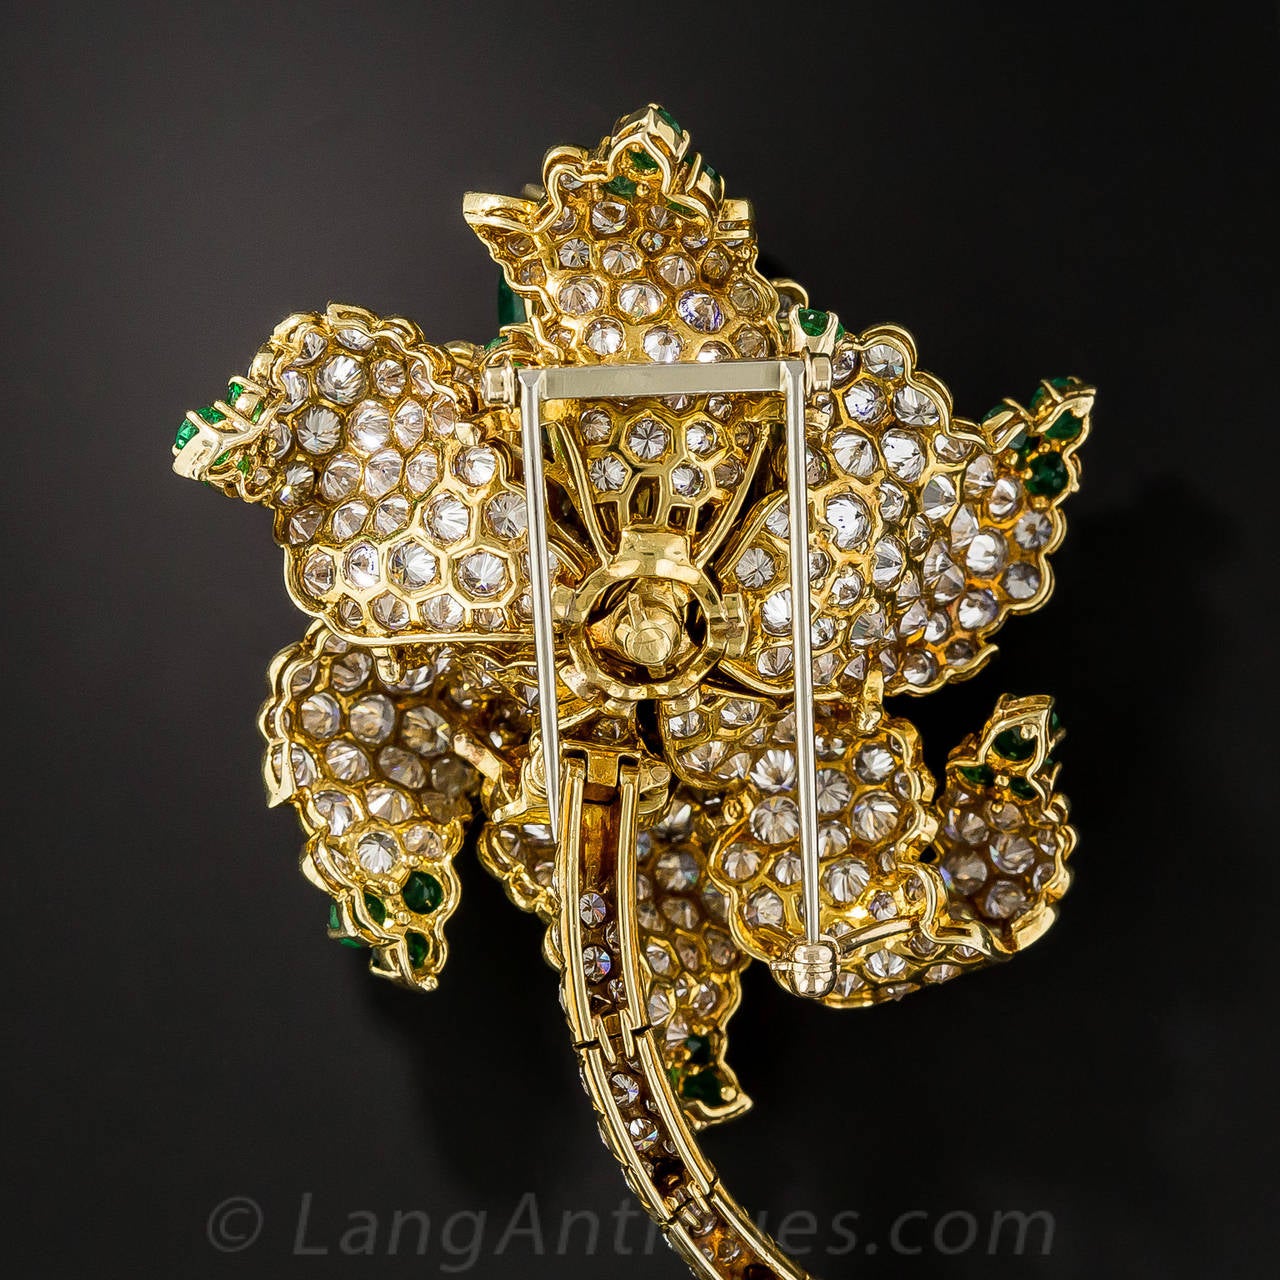 Spectacular 12 Carat Cabochon Emerald Diamond Gold Flower Brooch For Sale 2